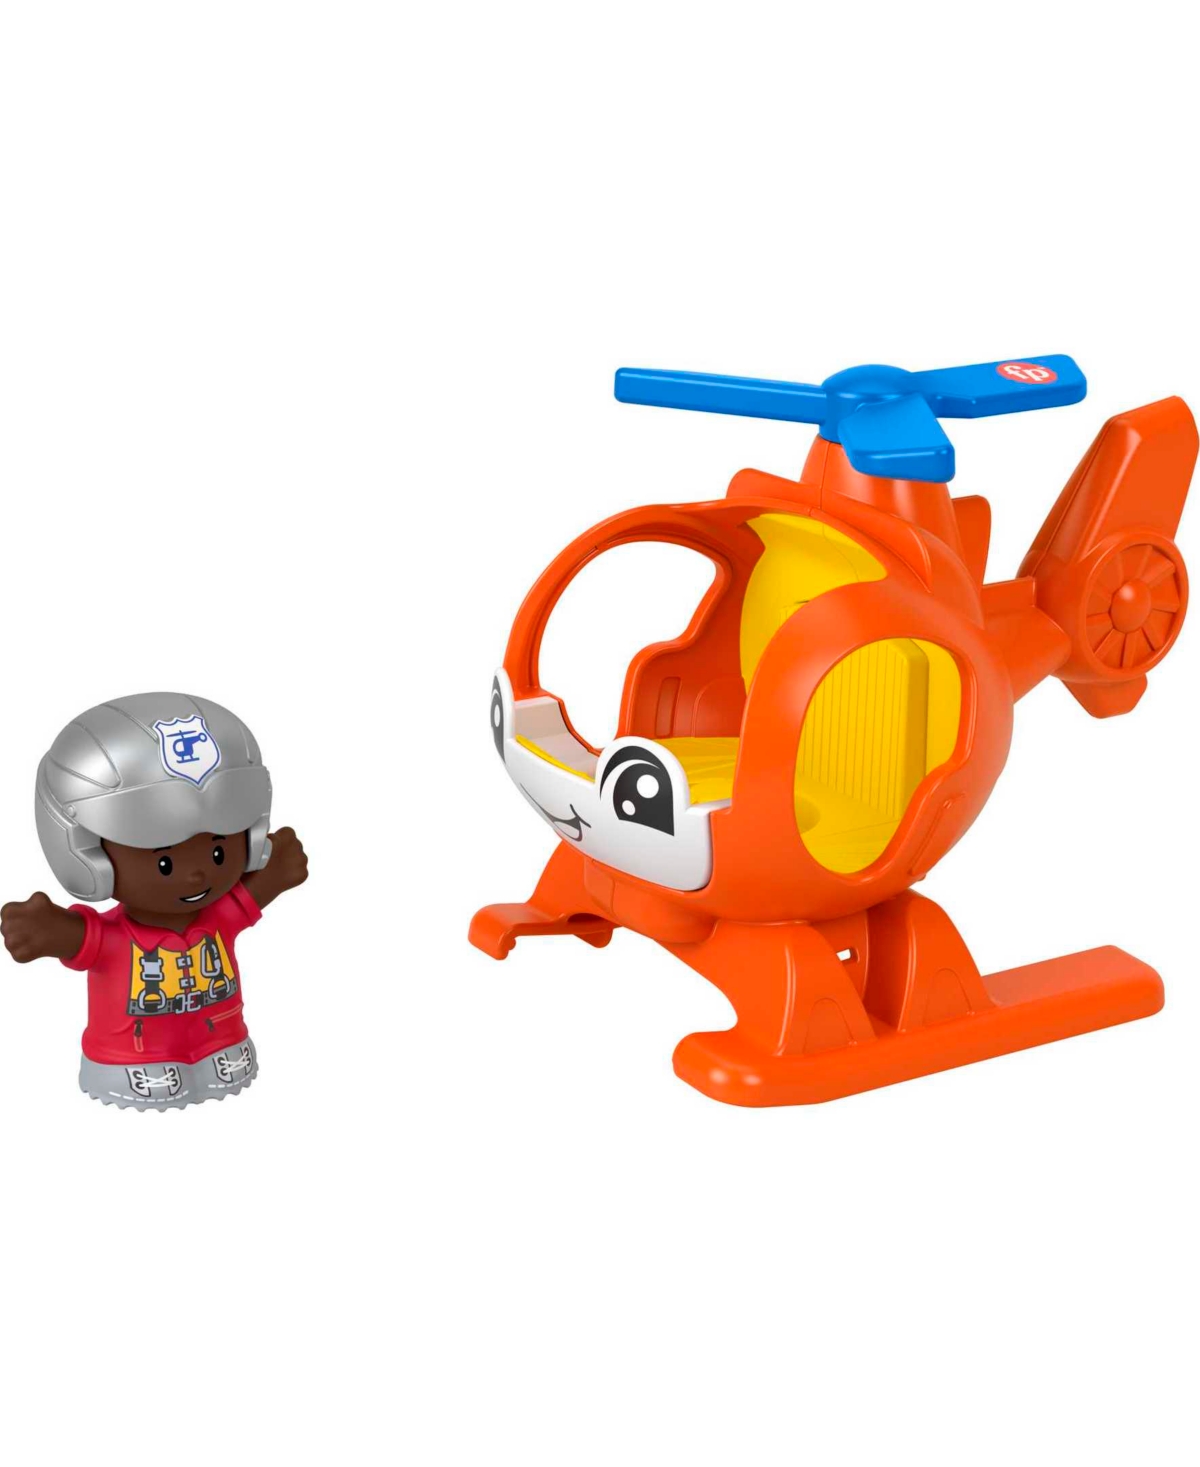 Fisher Price Kids' Little People Helicopter Toy And Pilot Figure Set For Toddlers, 2 Pieces In Multi-color